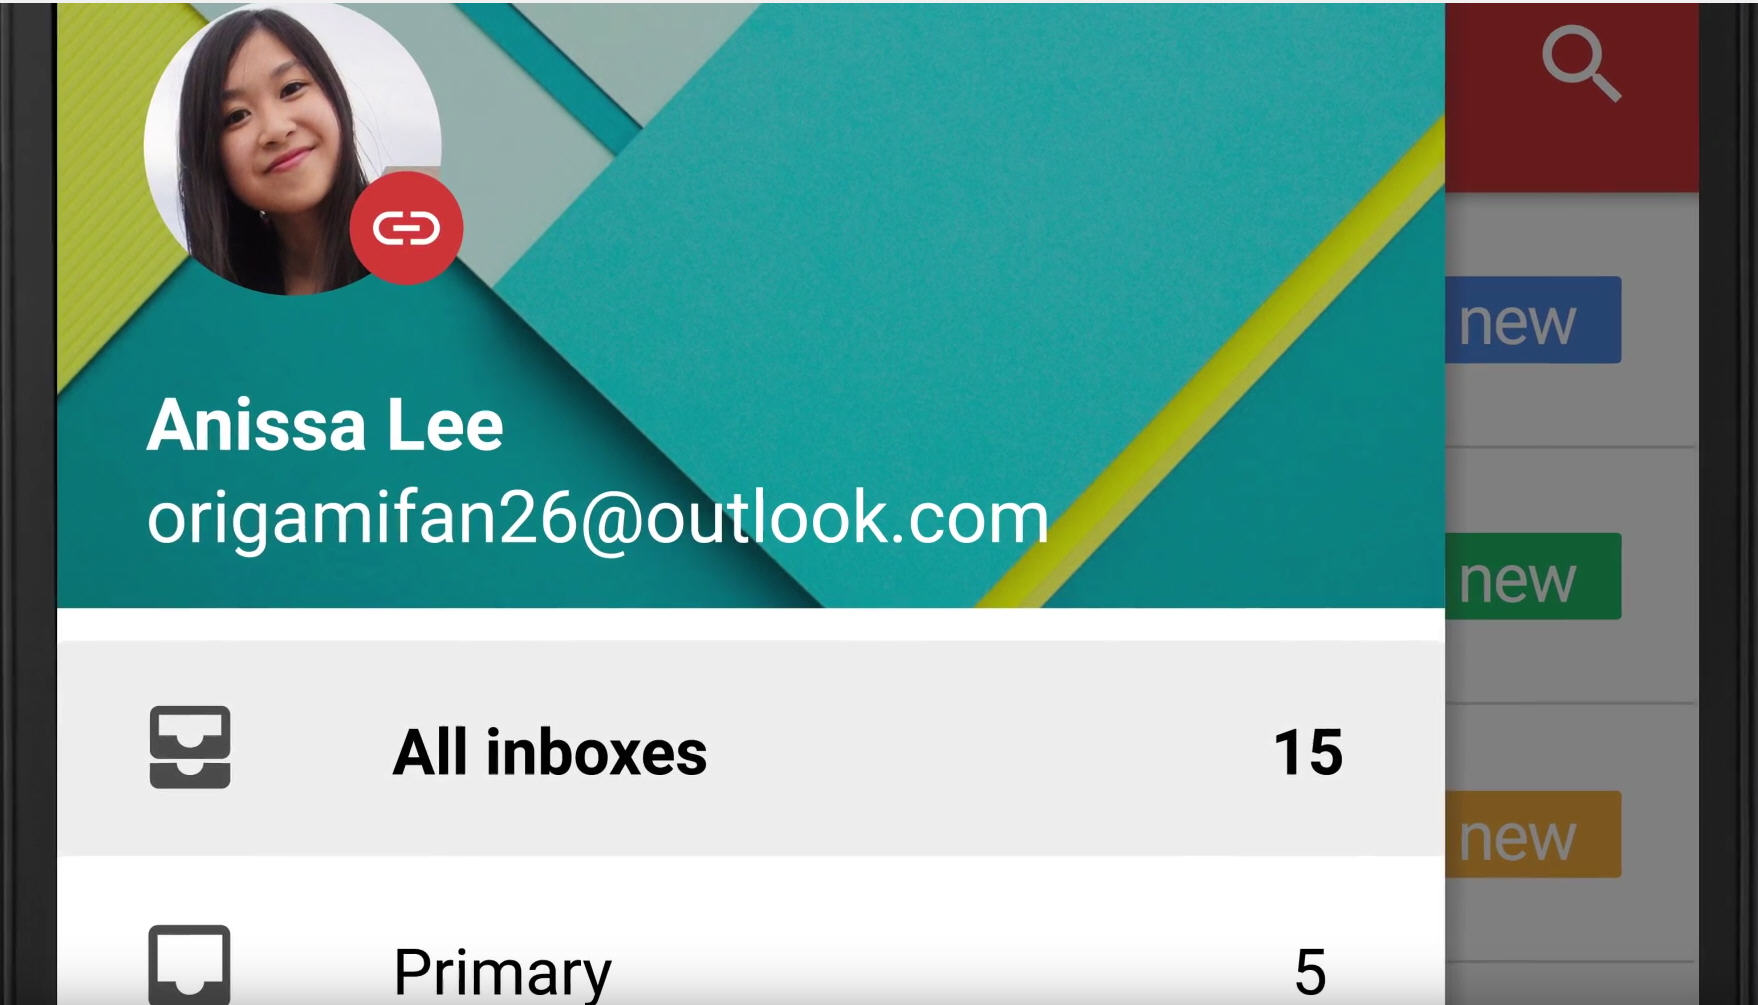 Gmailify Gives Your Yahoo or Outlook Email Accounts Access to Gmail's Features